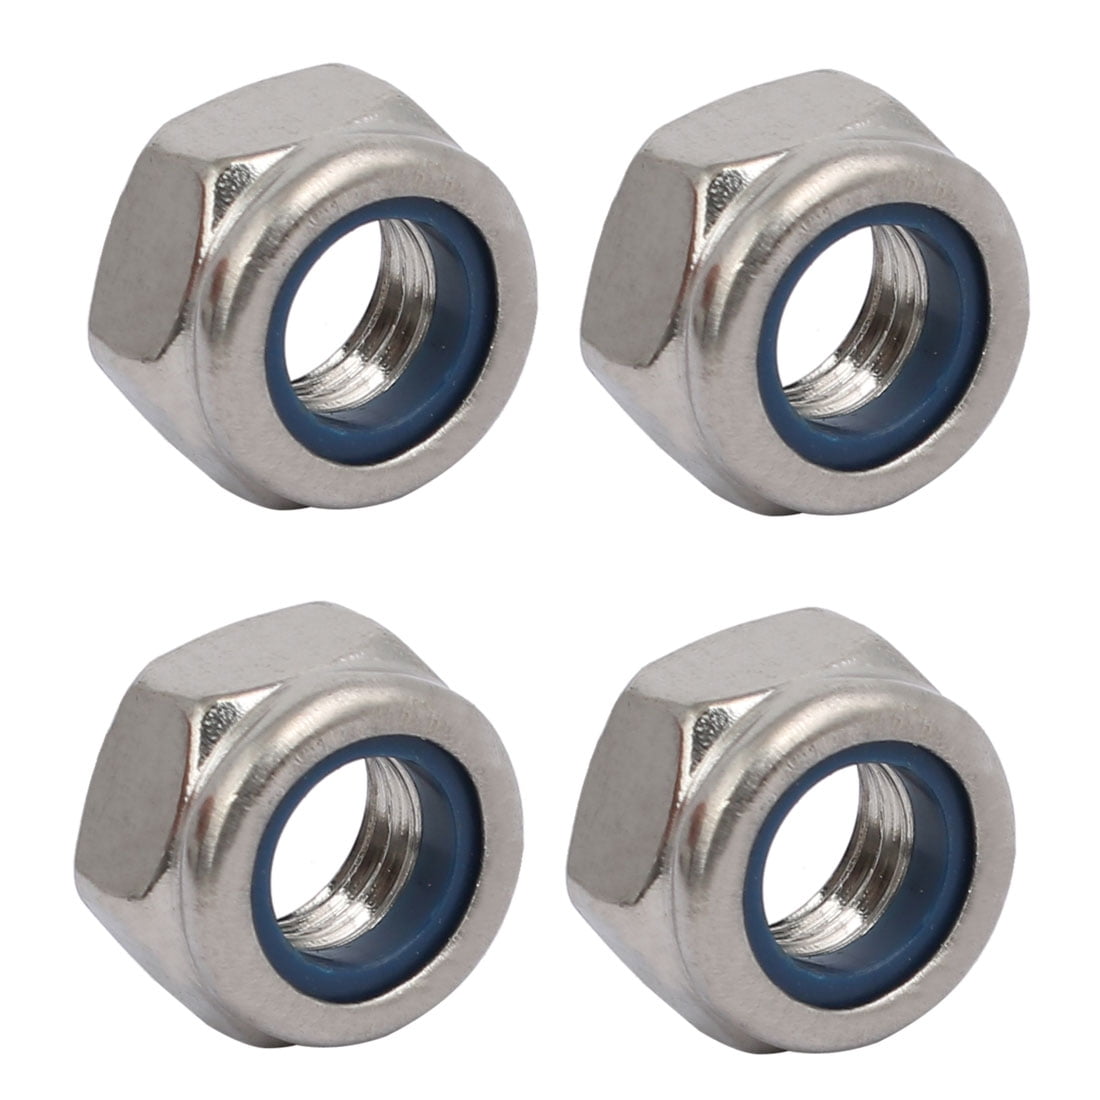 Qty 2500 Stainless Steel Keps K Lock Nut UNC 1/4-20 